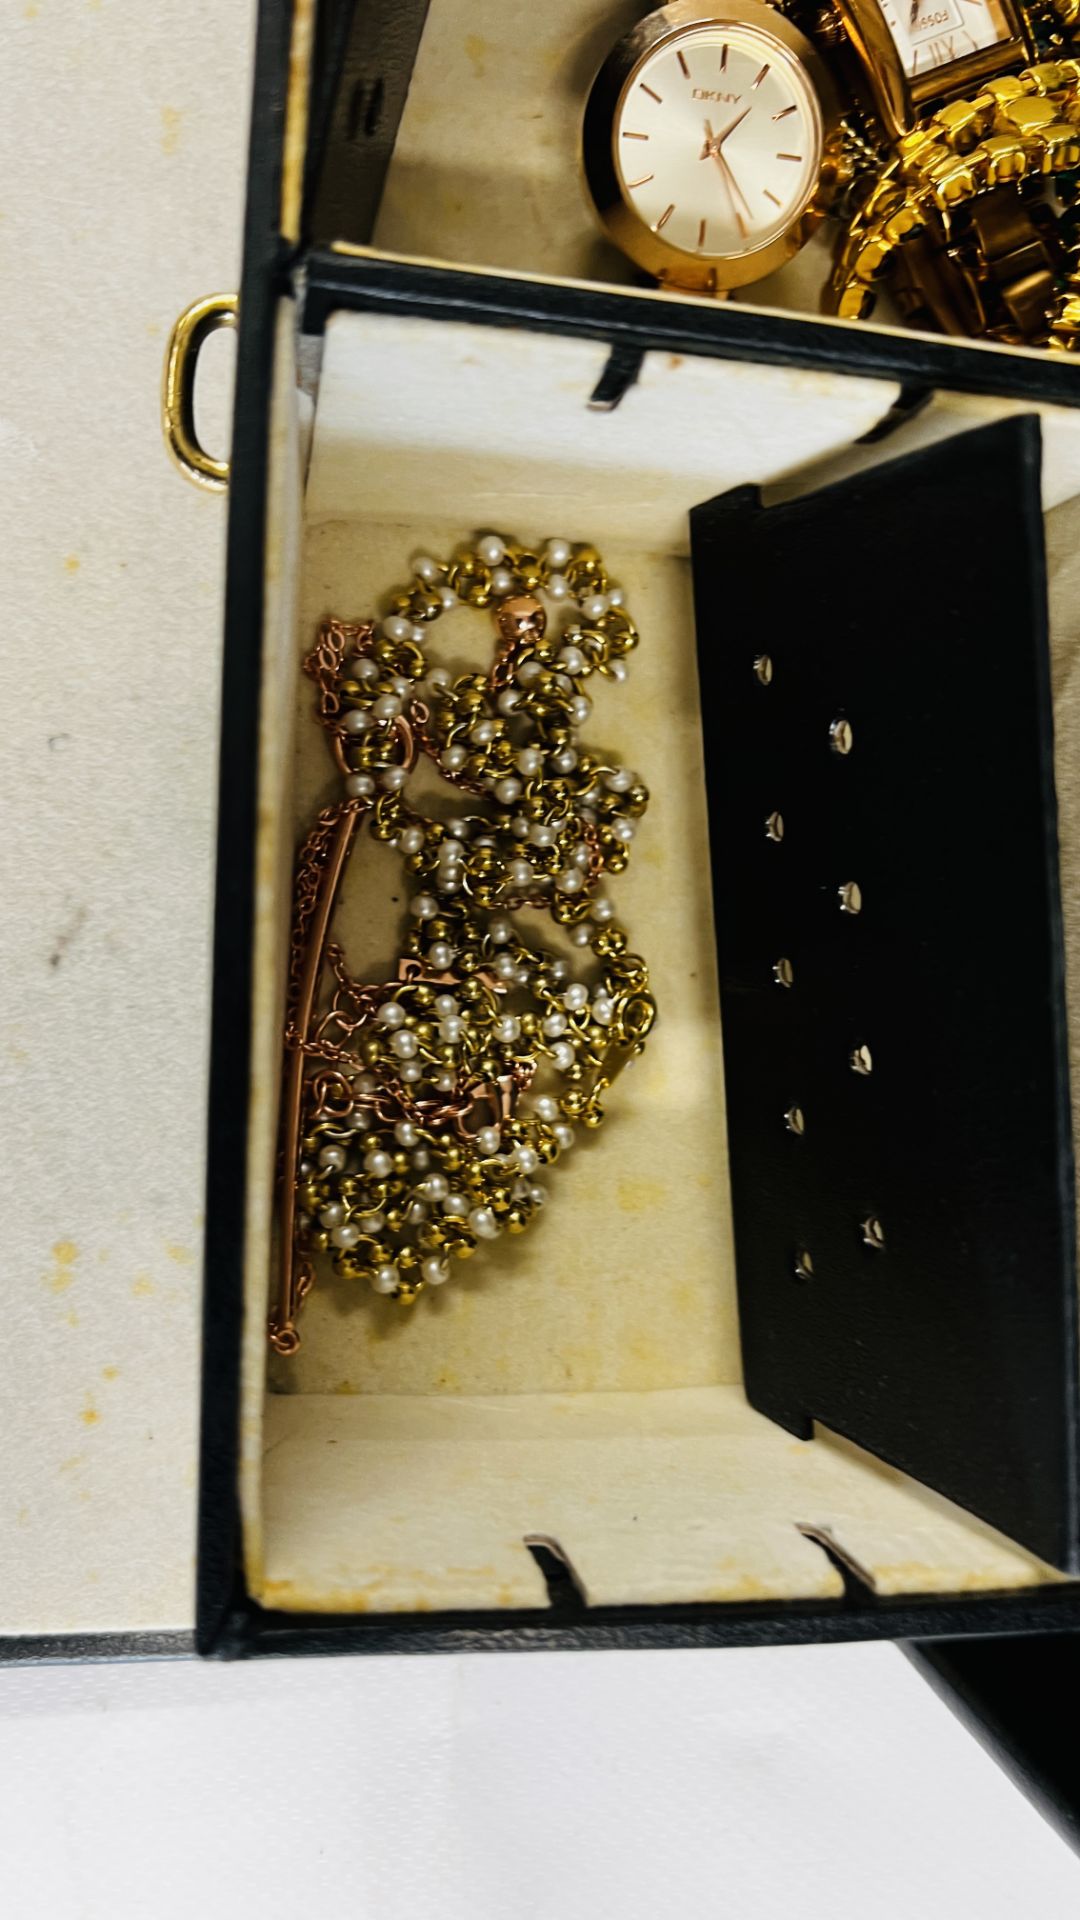 A SELECTION OF COSTUME JEWELLERY IN A LARGE BLACK JEWELLERY BOX. - Image 7 of 10